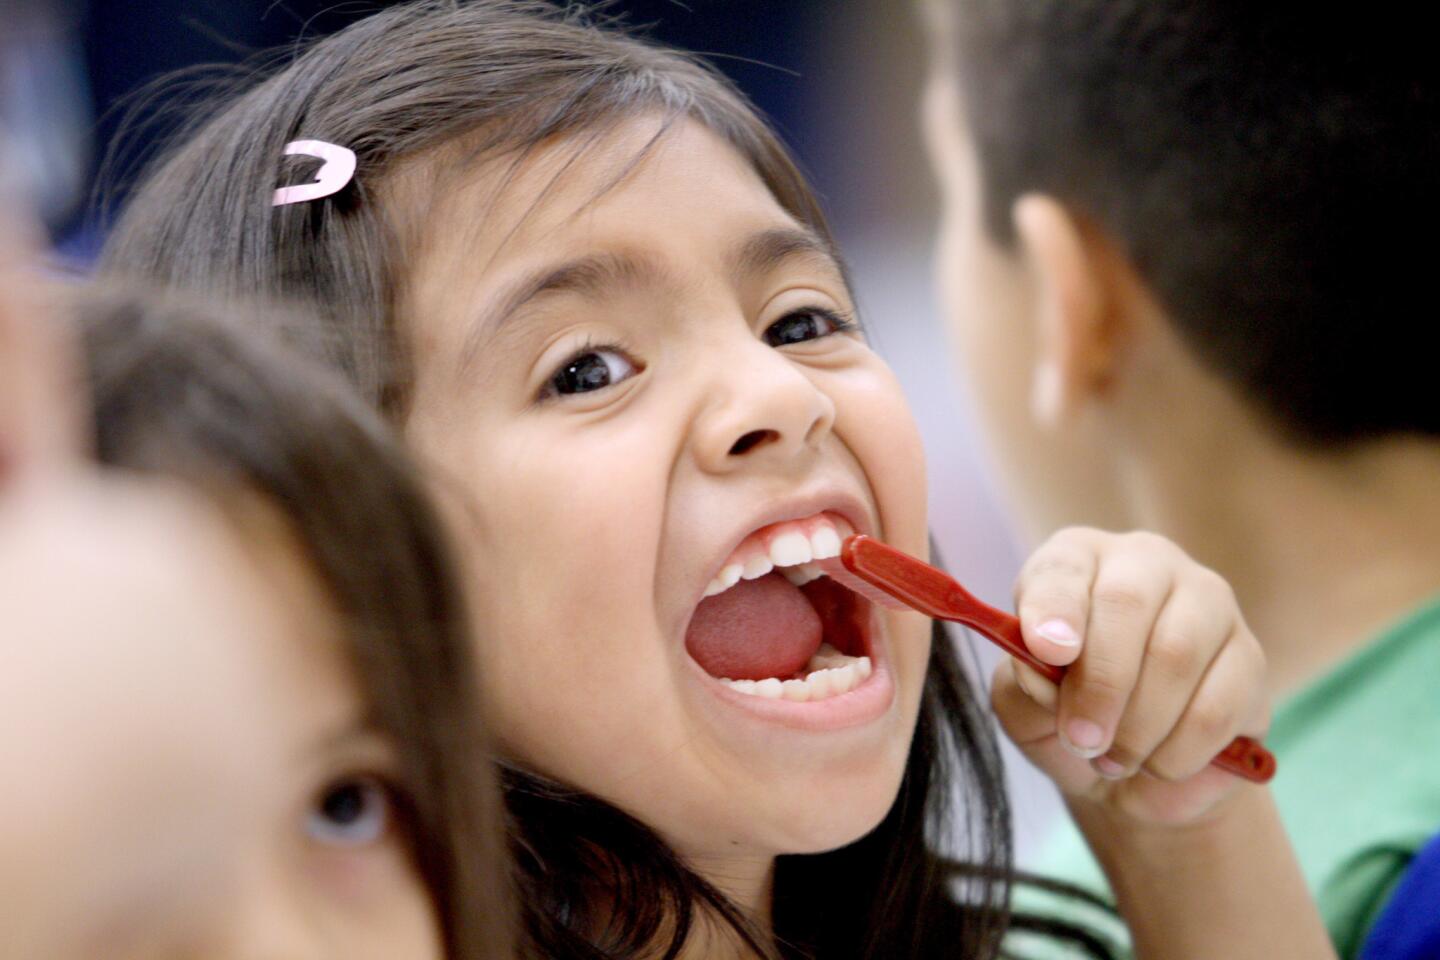 Providencia Elementary School first grader Amy Huaman practices brushing her teeth during a visit by the Kids Community Dental Clinic to her school, in Burbank on Wednesday, Feb. 17, 2016. The free clinic offered free dental check ups for 450 students, all provided by West L.A. College Dental Hygiene students and three volunteer dentists.